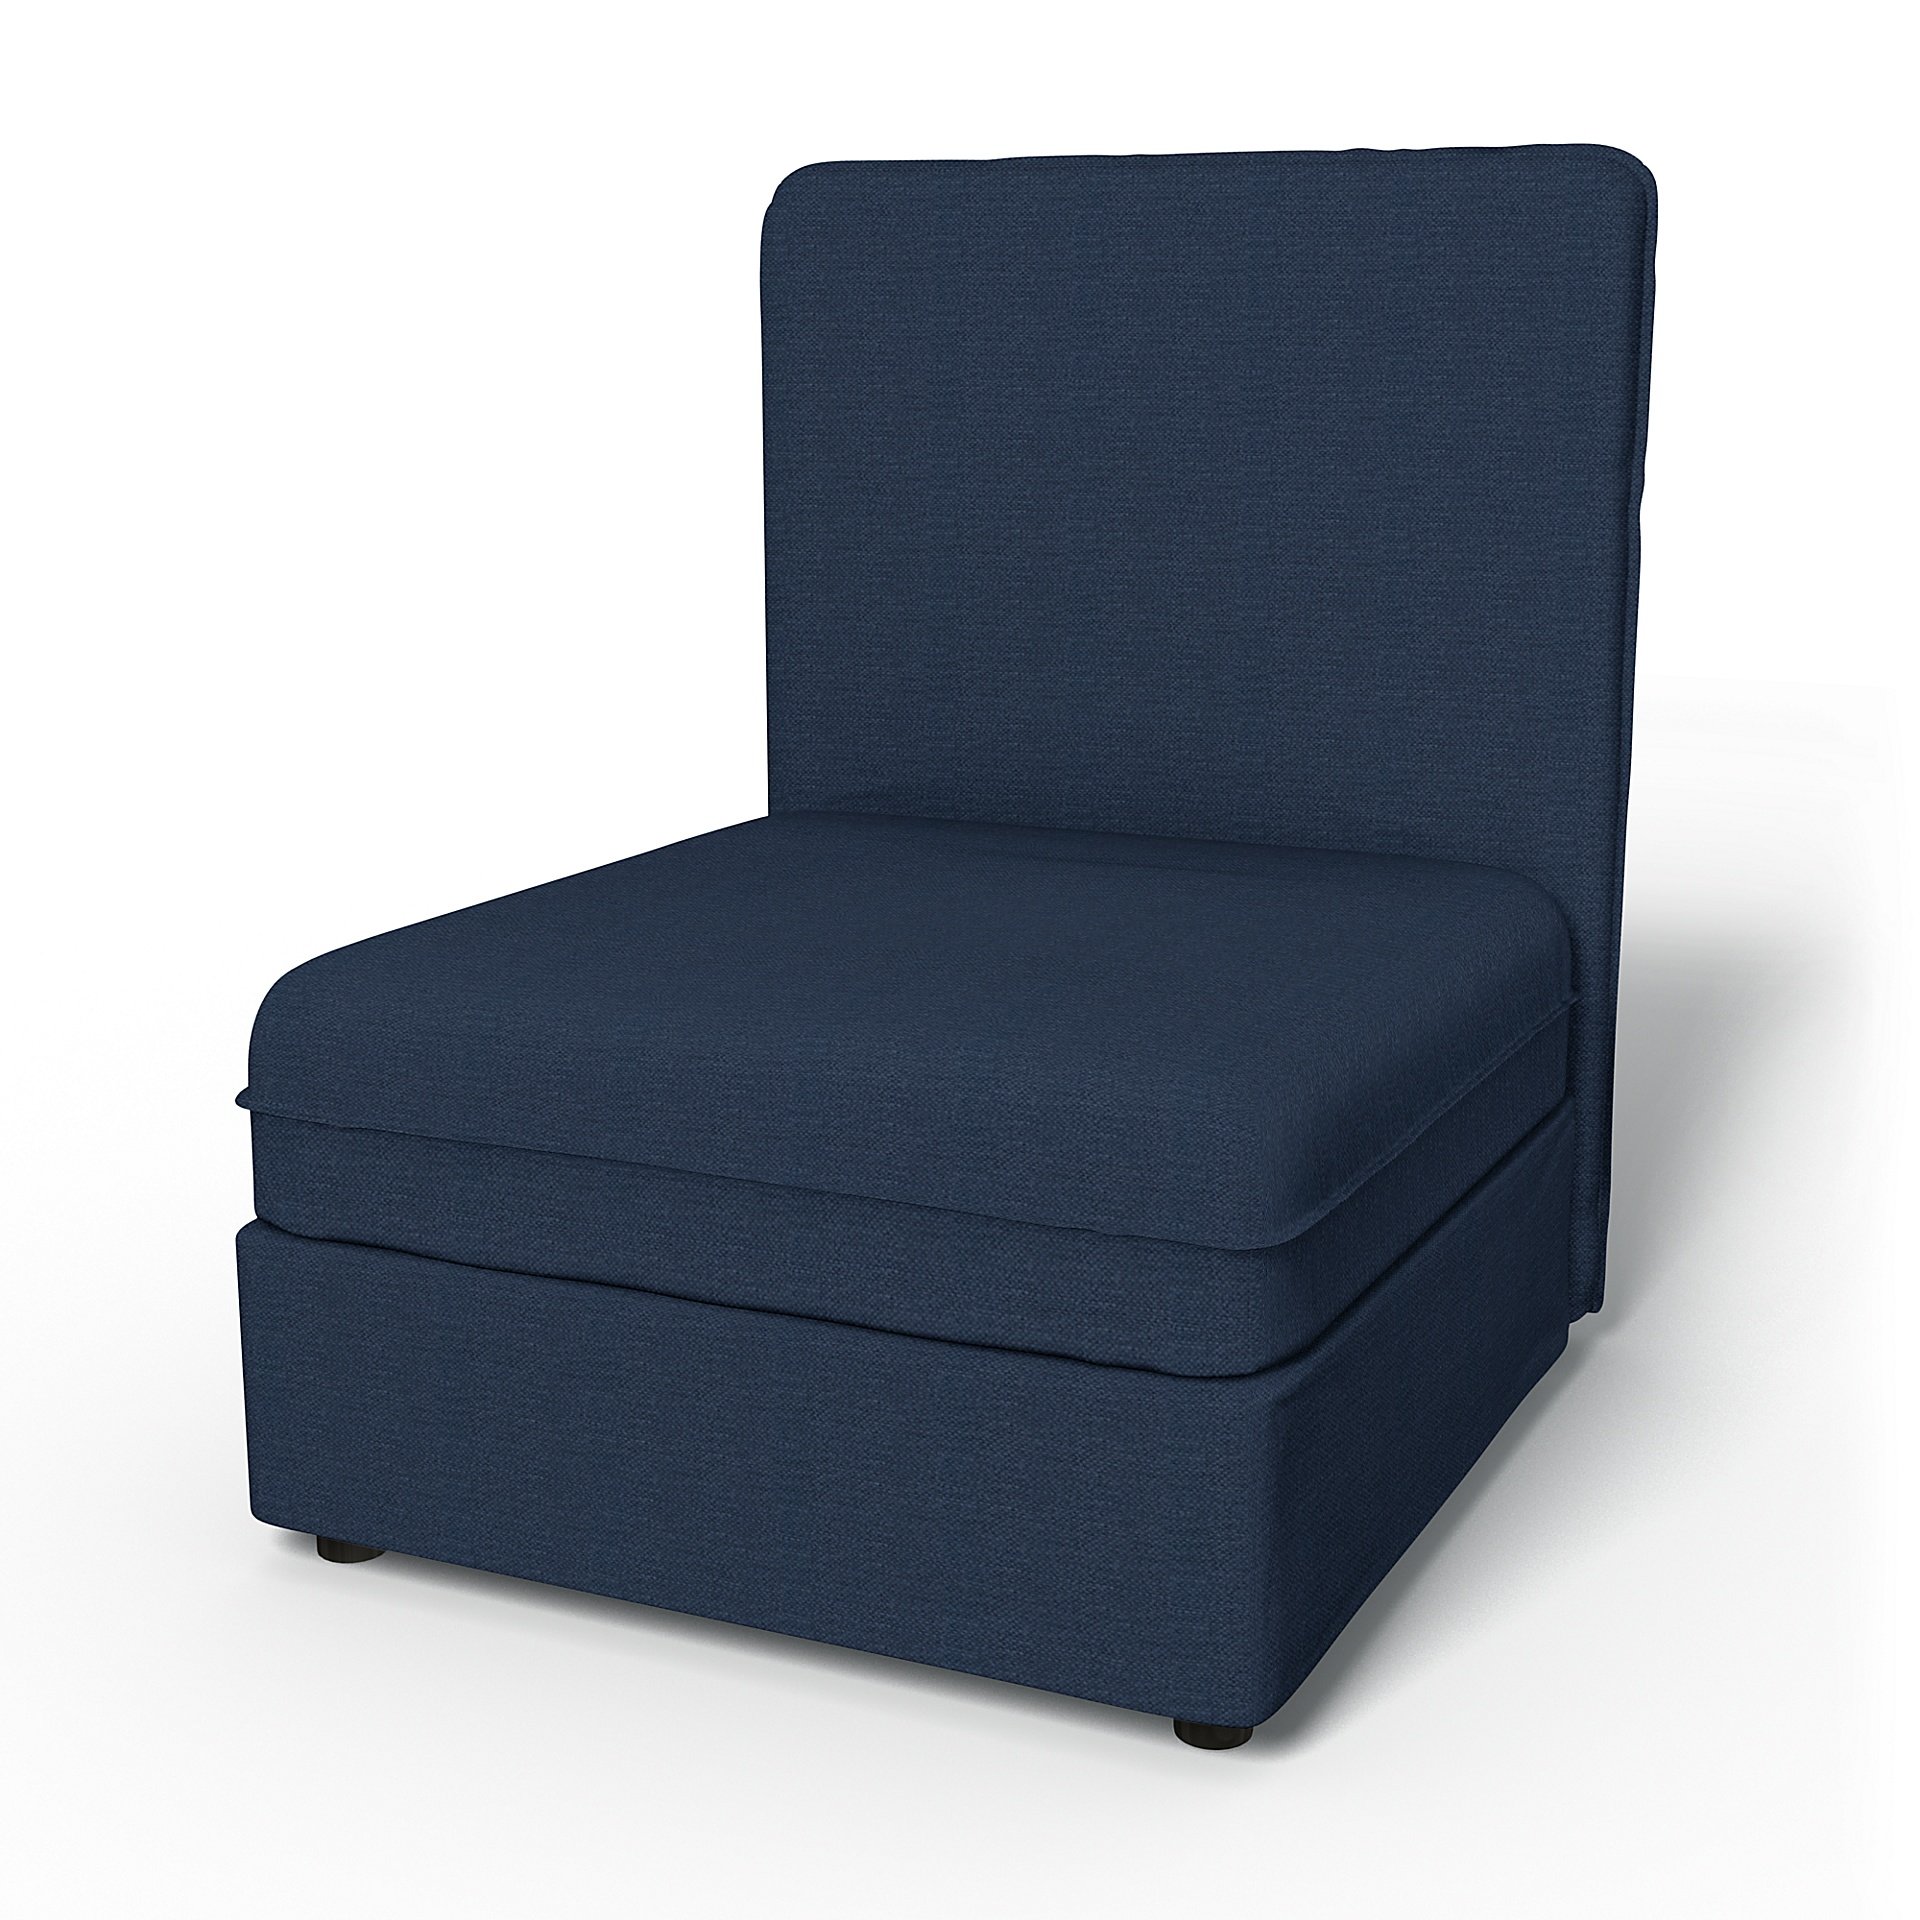 IKEA - Vallentuna Seat Module with High Back and Storage Cover 80x100cm 32x39in, Navy Blue, Linen - 